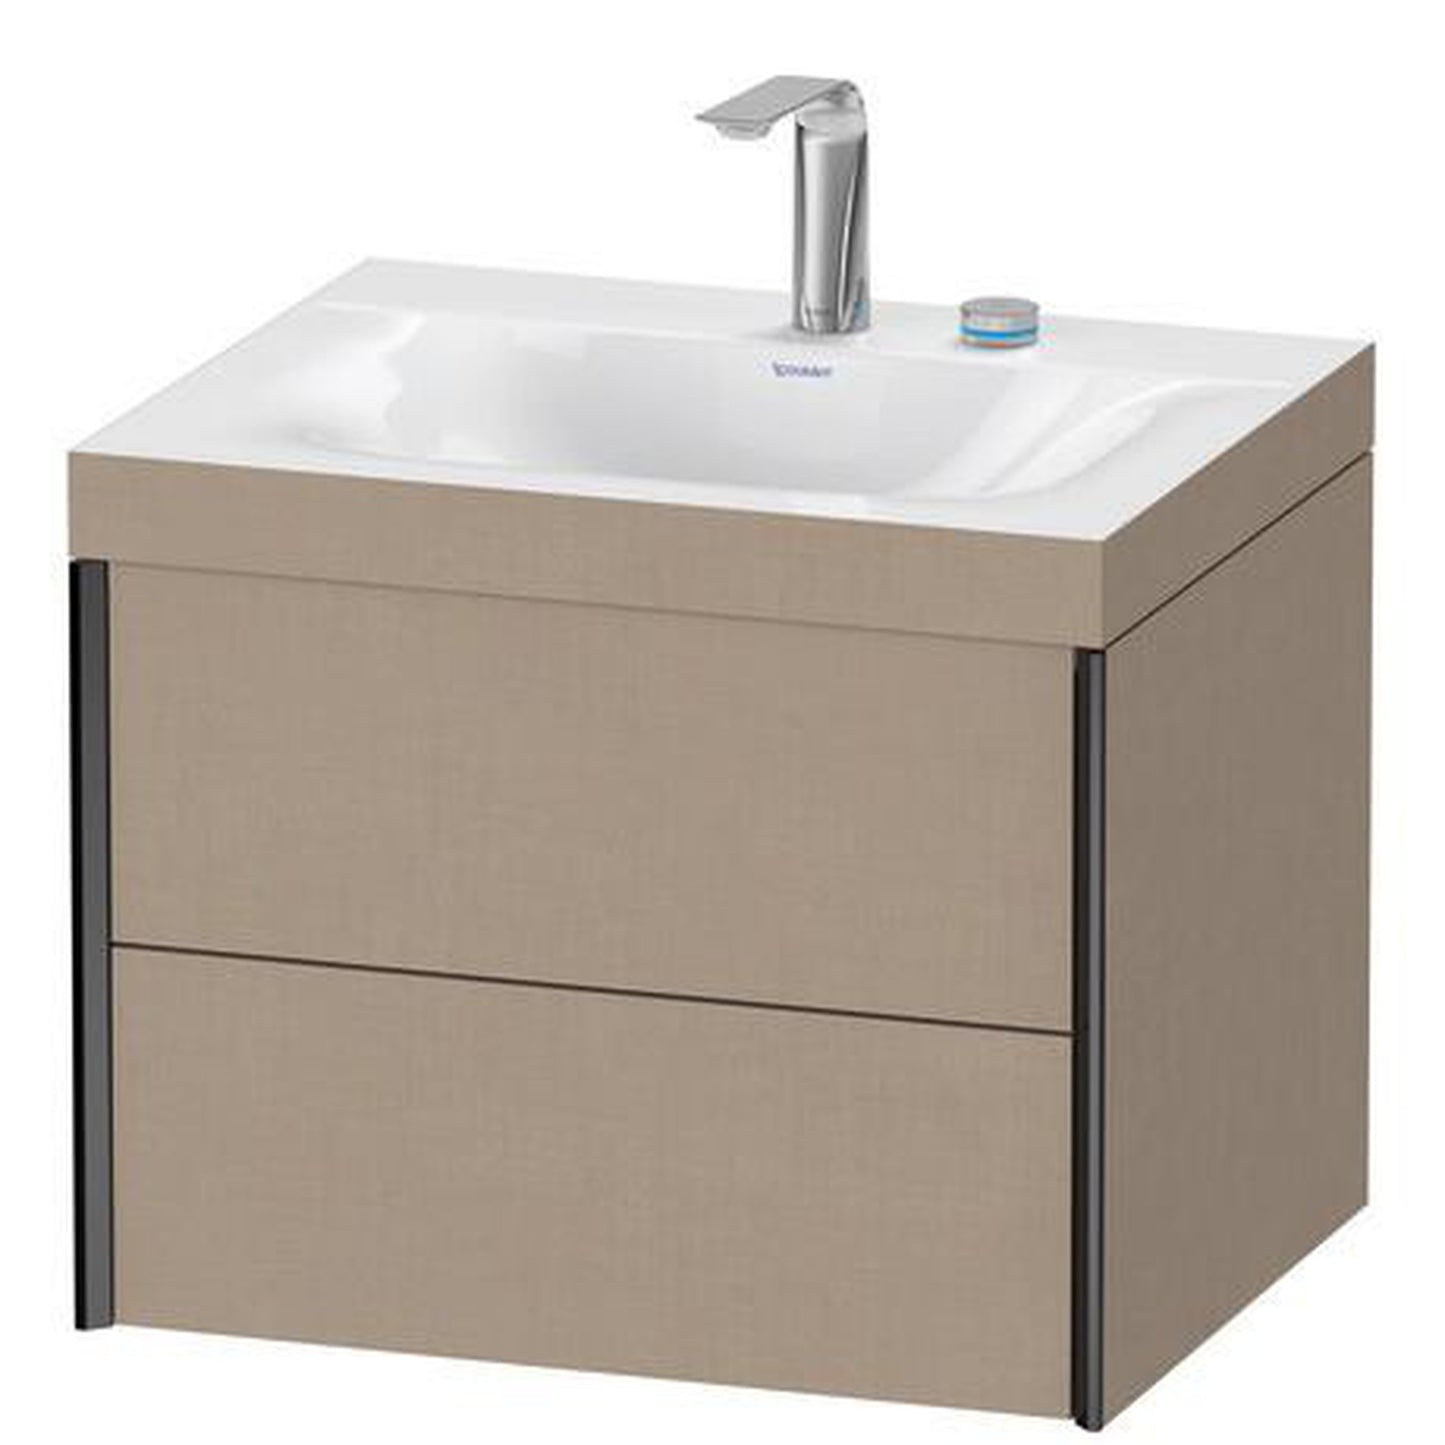 Duravit Xviu 24" x 20" x 19" Two Drawer C-Bonded Wall-Mount Vanity Kit With Two Tap Holes, Linen (XV4614EB275C)